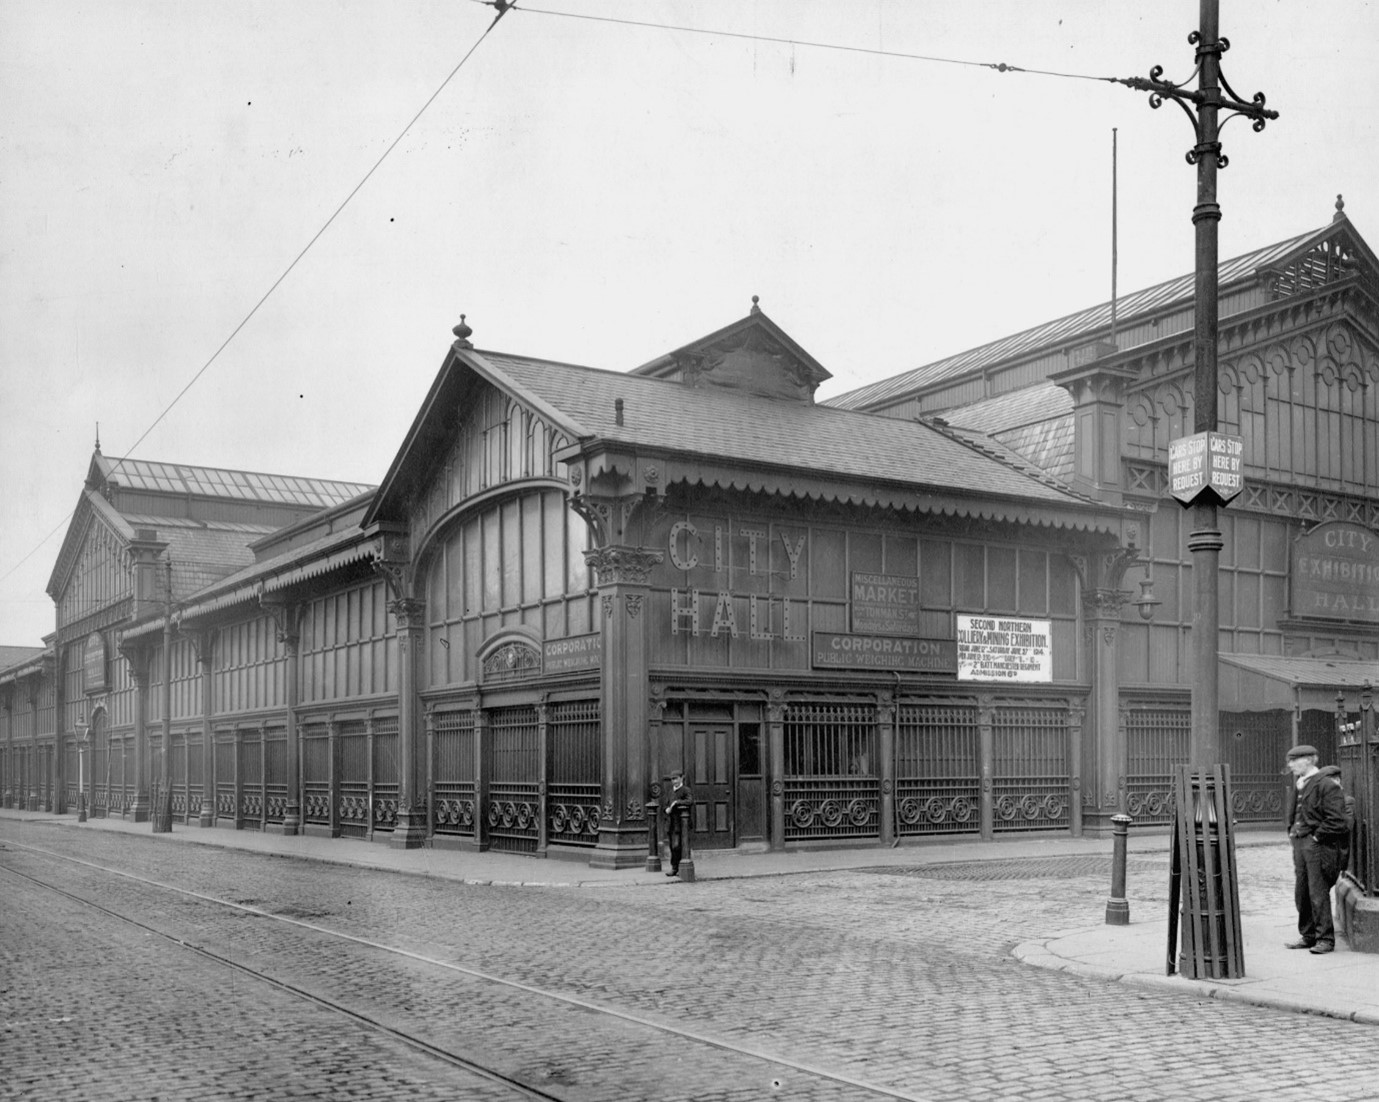 Black and white photo of the exterior of an old market hall